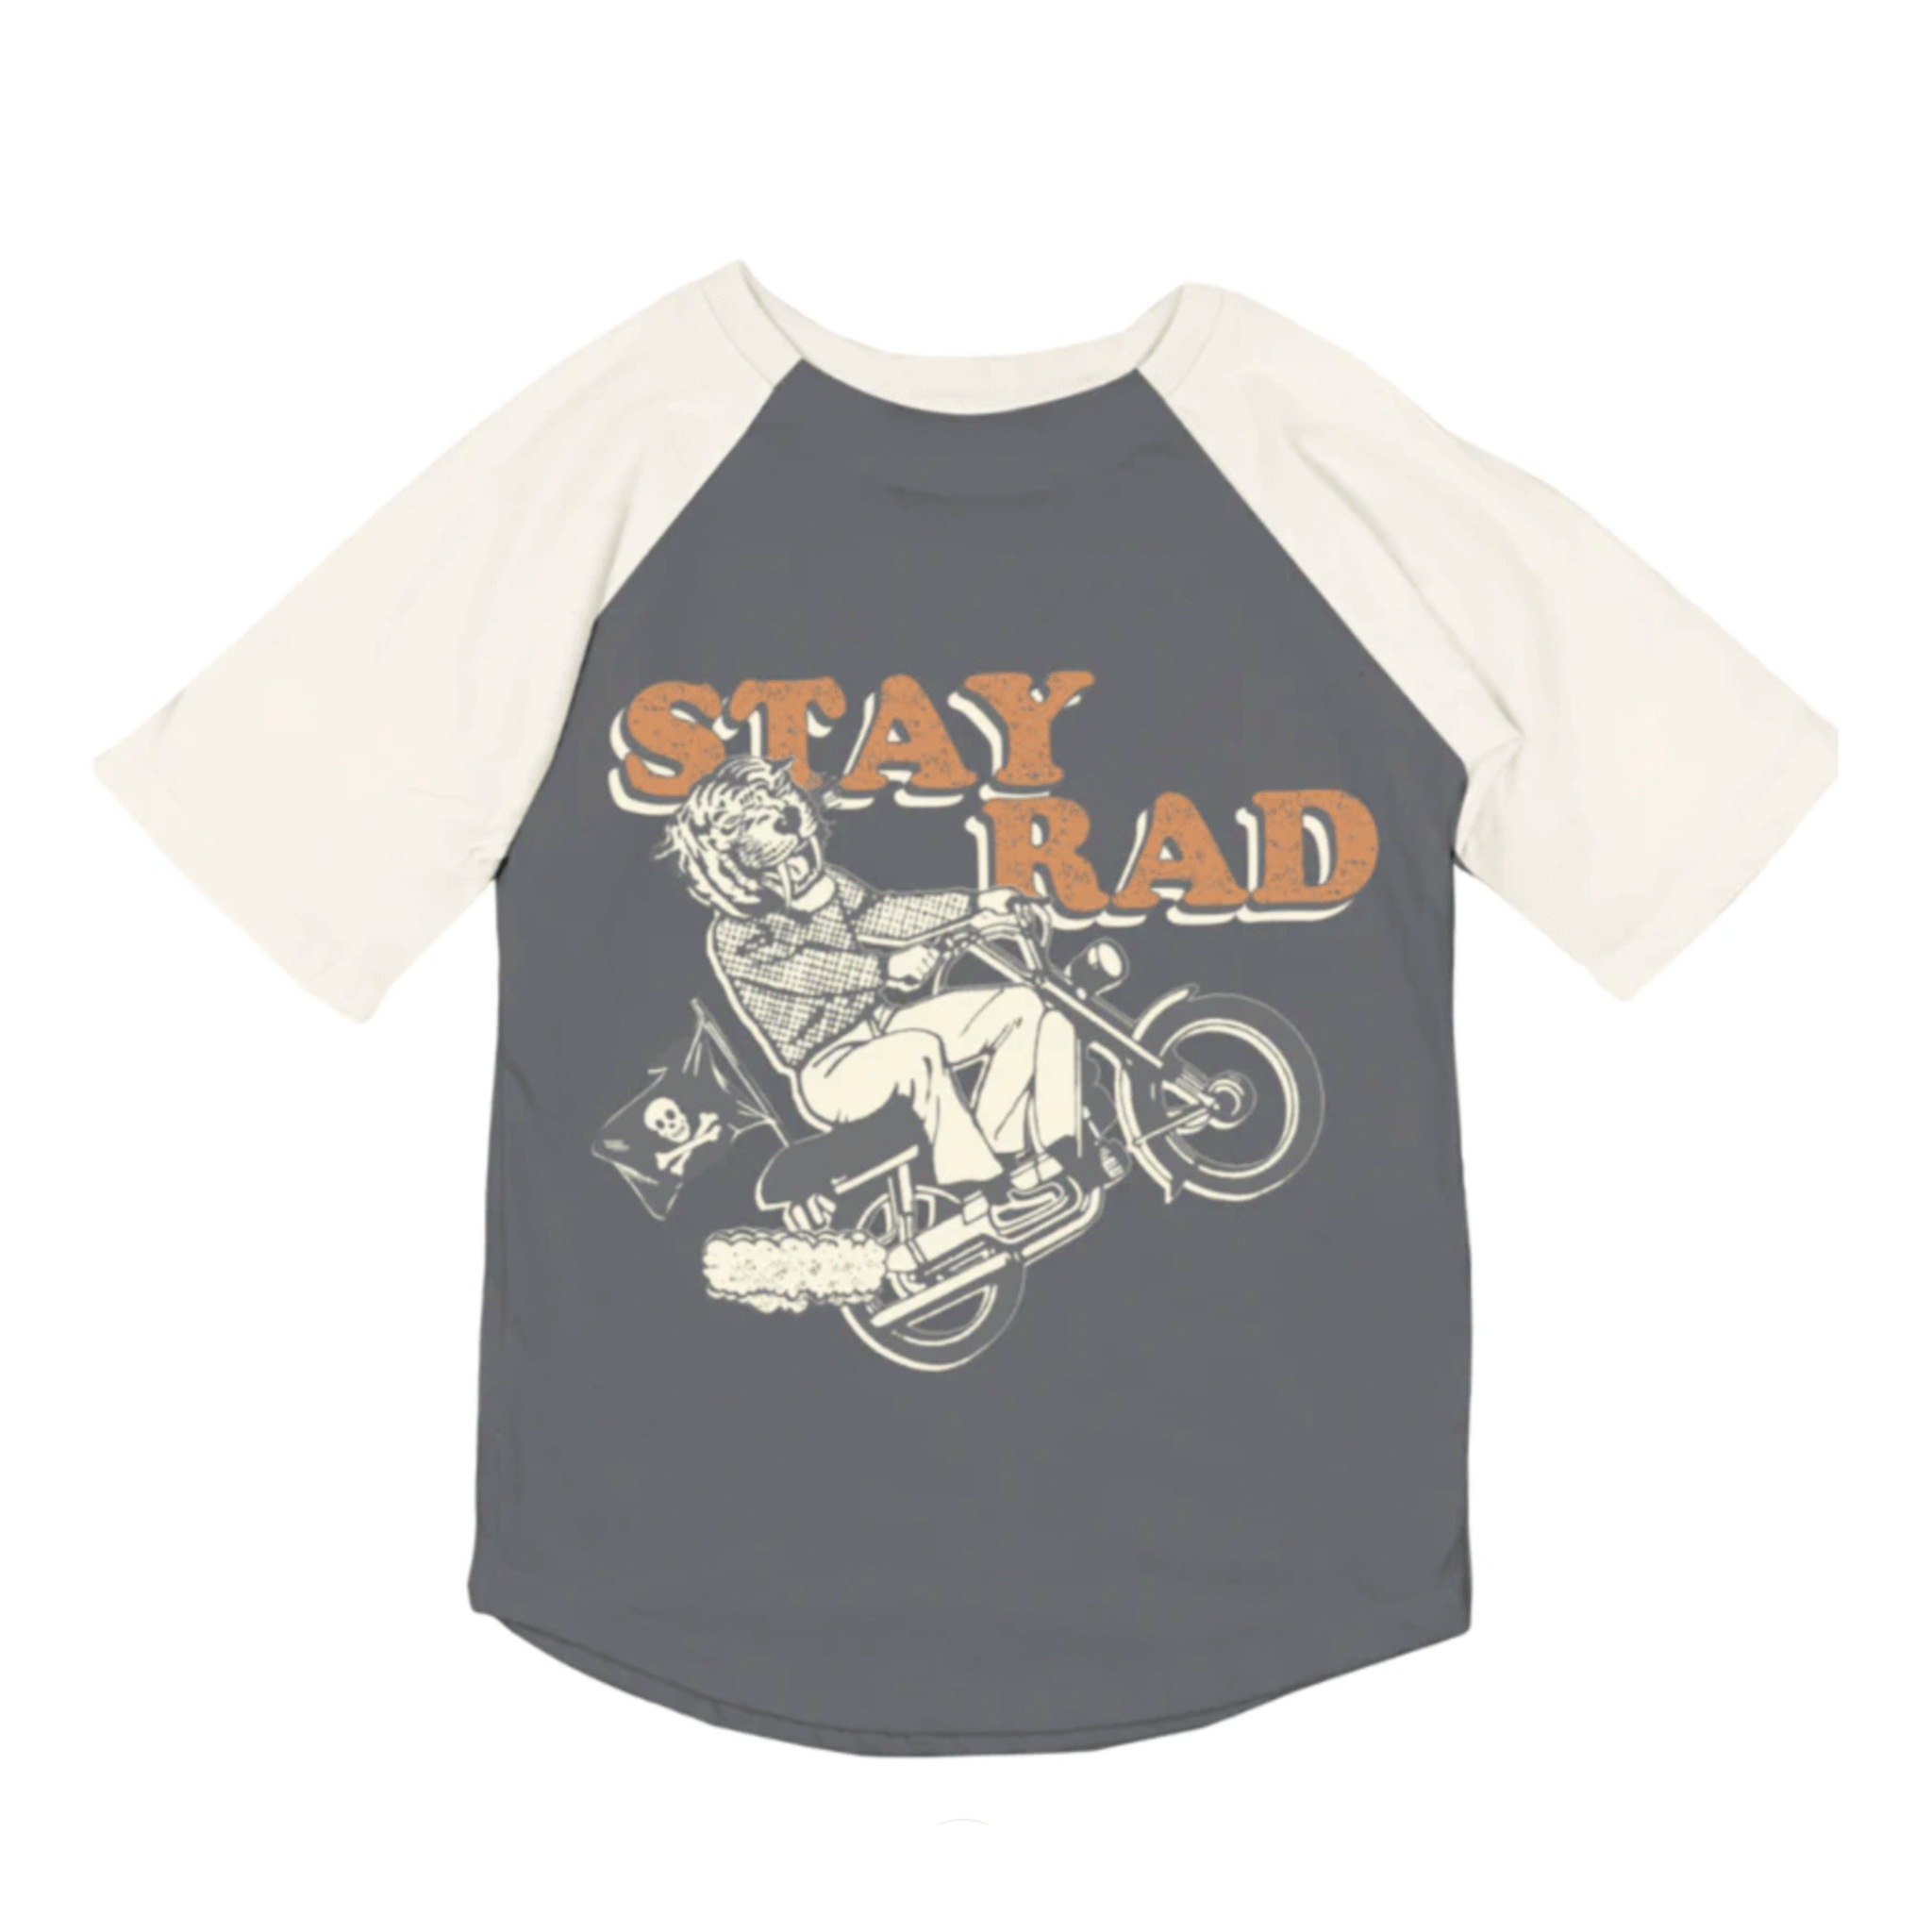 On a white background is a vintage faded black t-shirt for children with ivory short sleeves and a graphic of a tiger riding a motorcycle and text above it that reads, &quot;Stay Rad&quot;. 